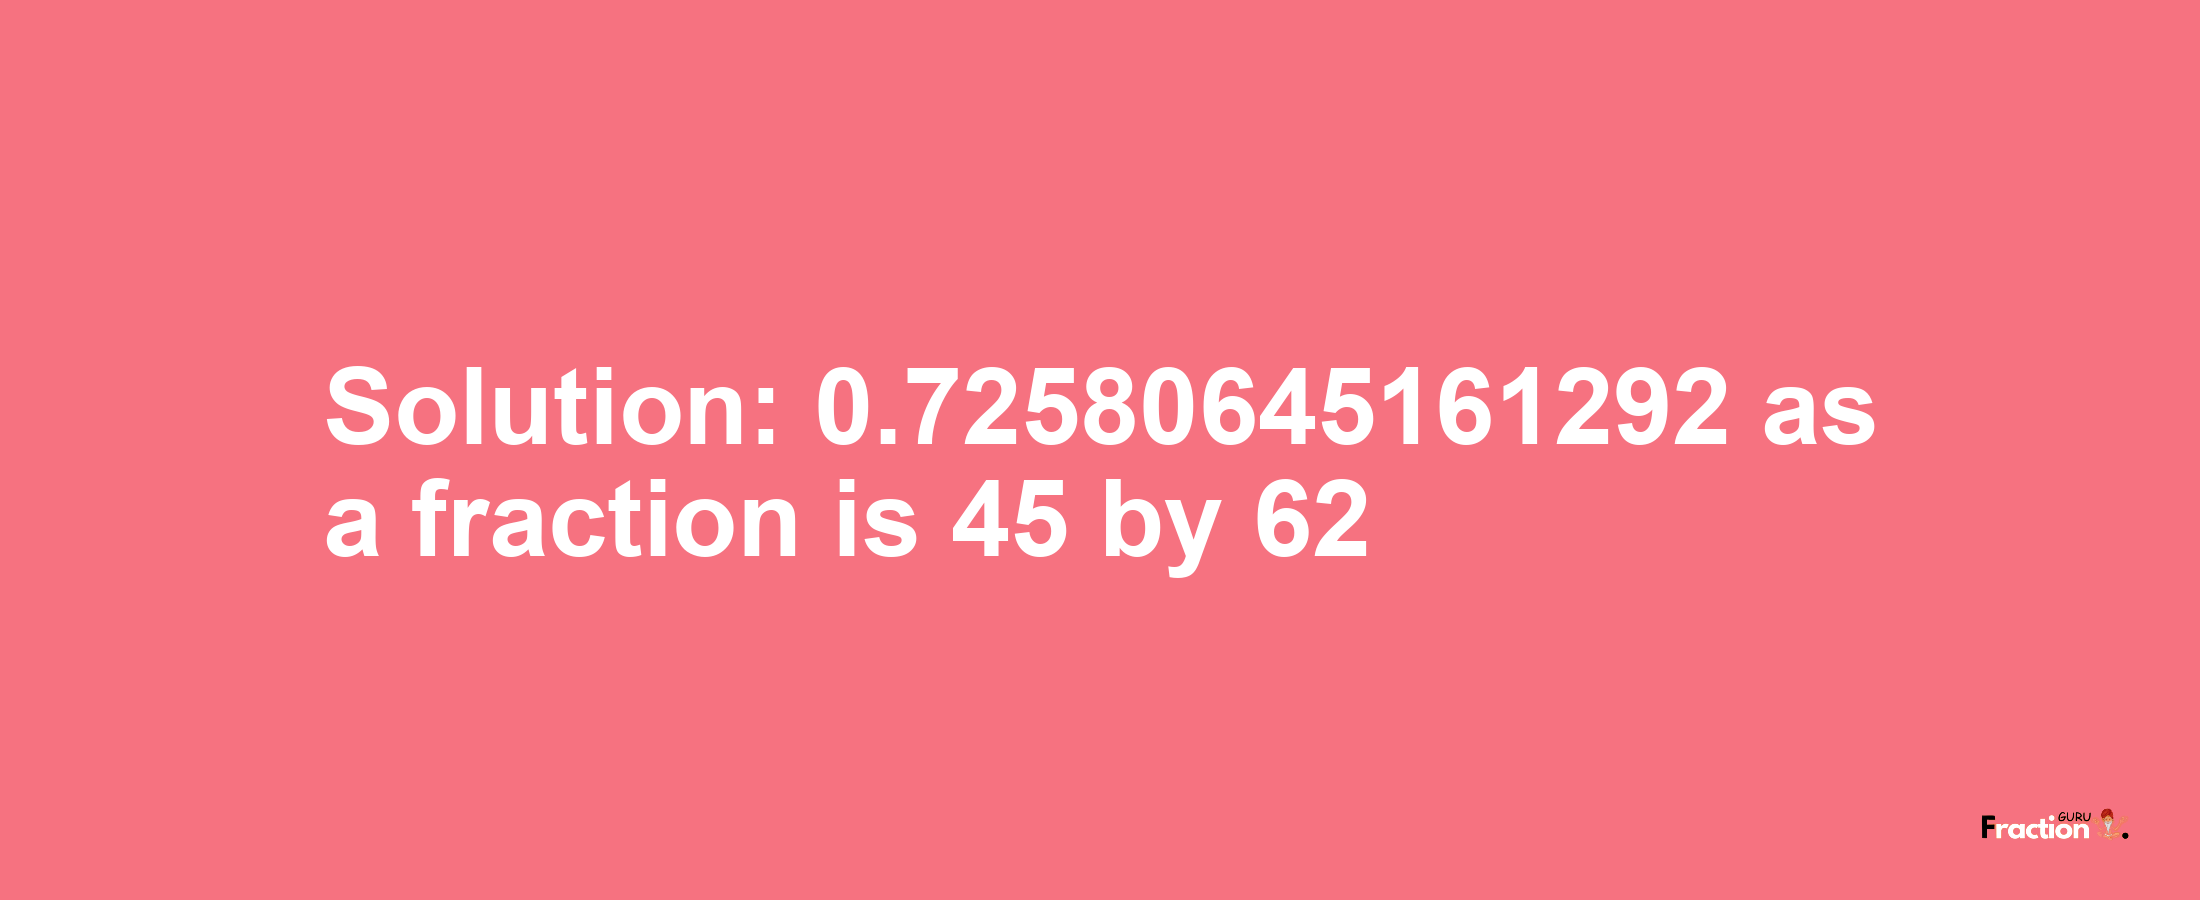 Solution:0.72580645161292 as a fraction is 45/62